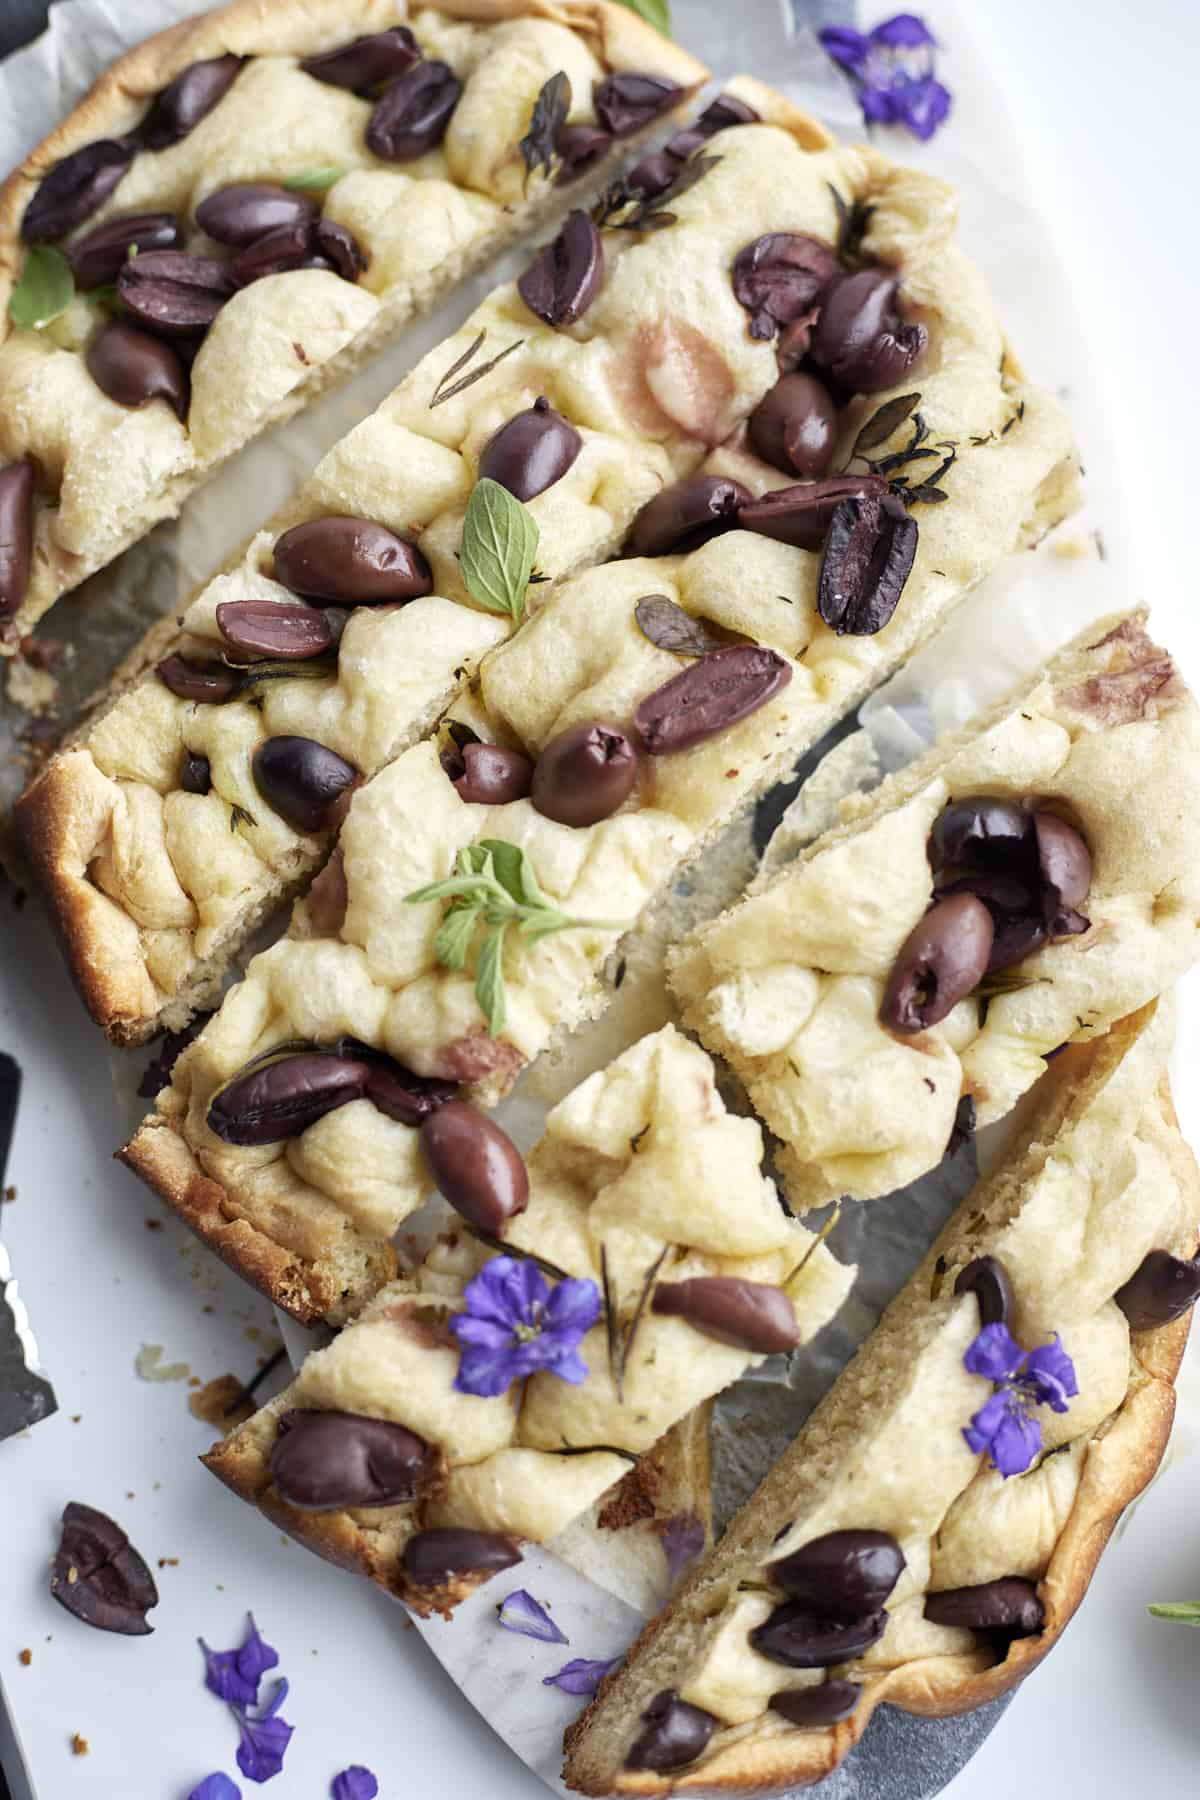 focaccia bread with kalamata olives on a marble slab garnished with fresh basil